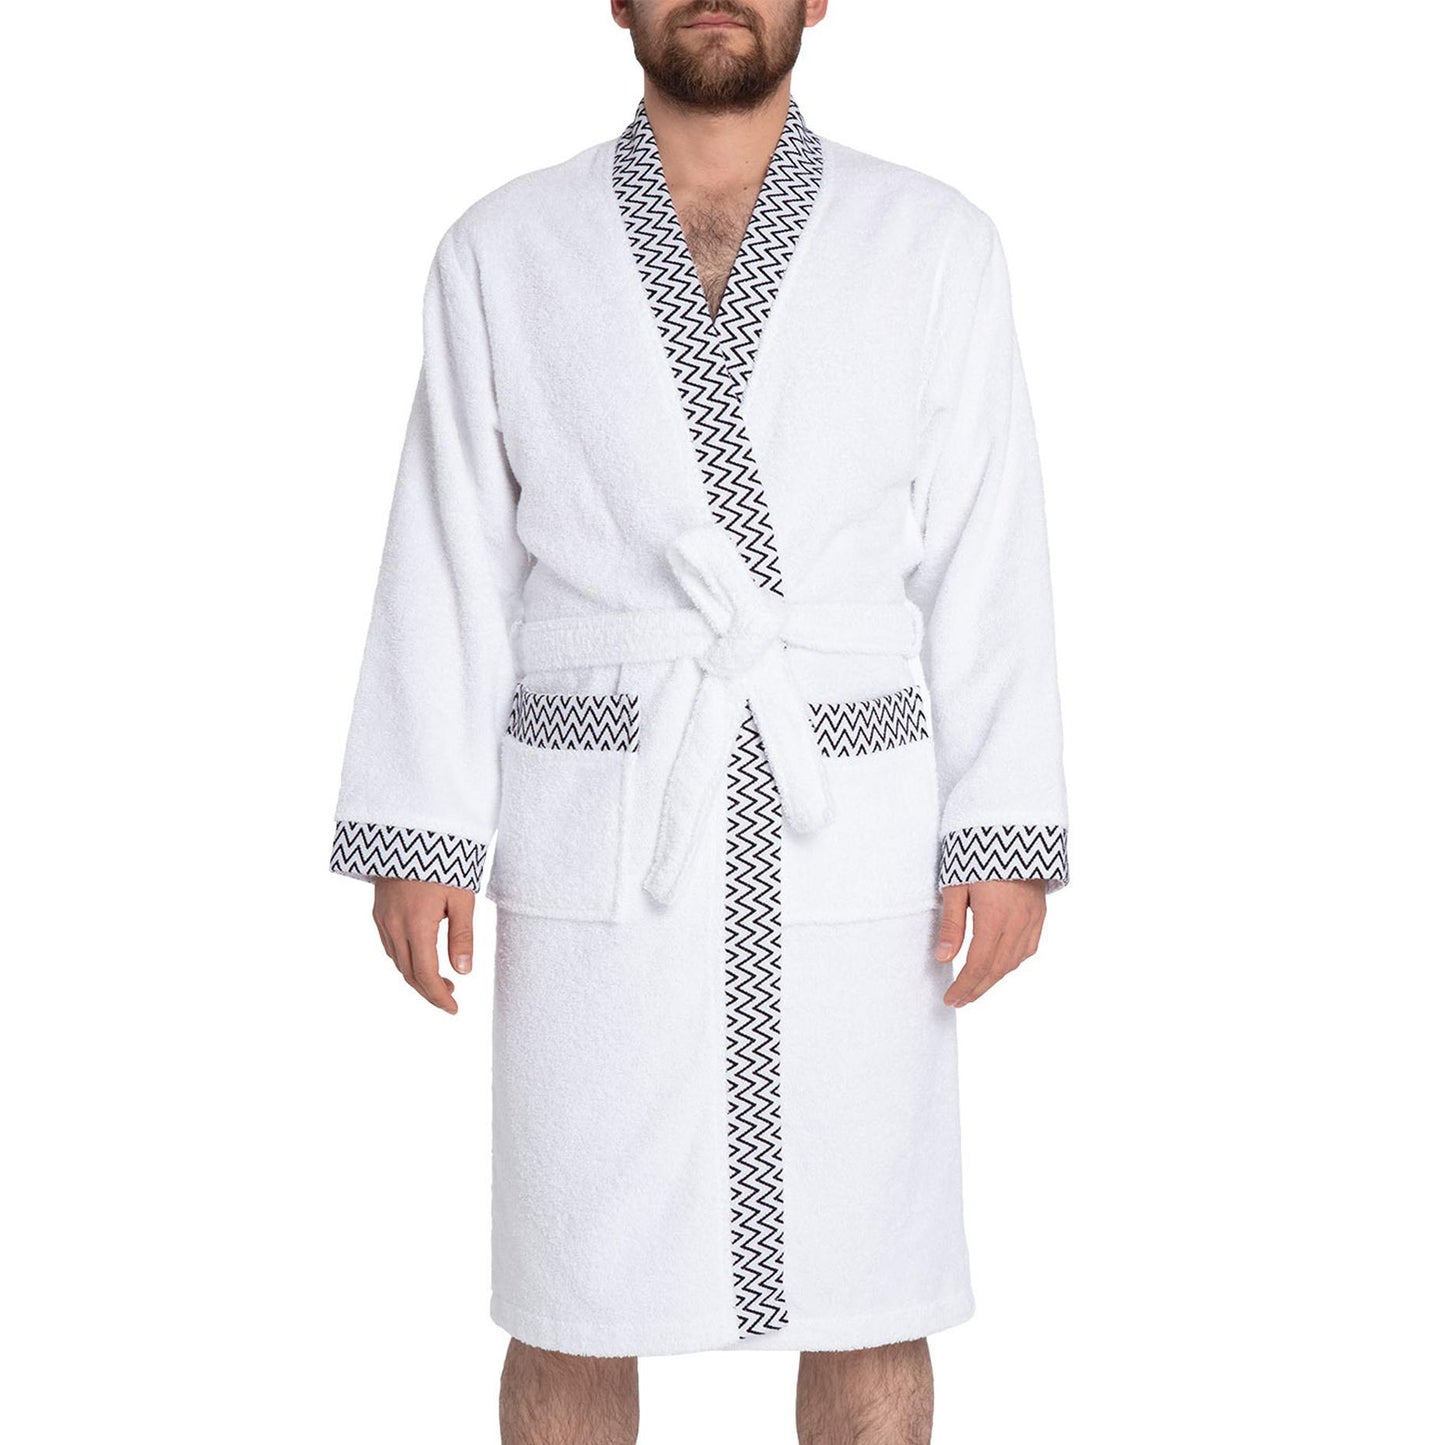 White bathrobe made from 100% cotton, suitable for both men and women.